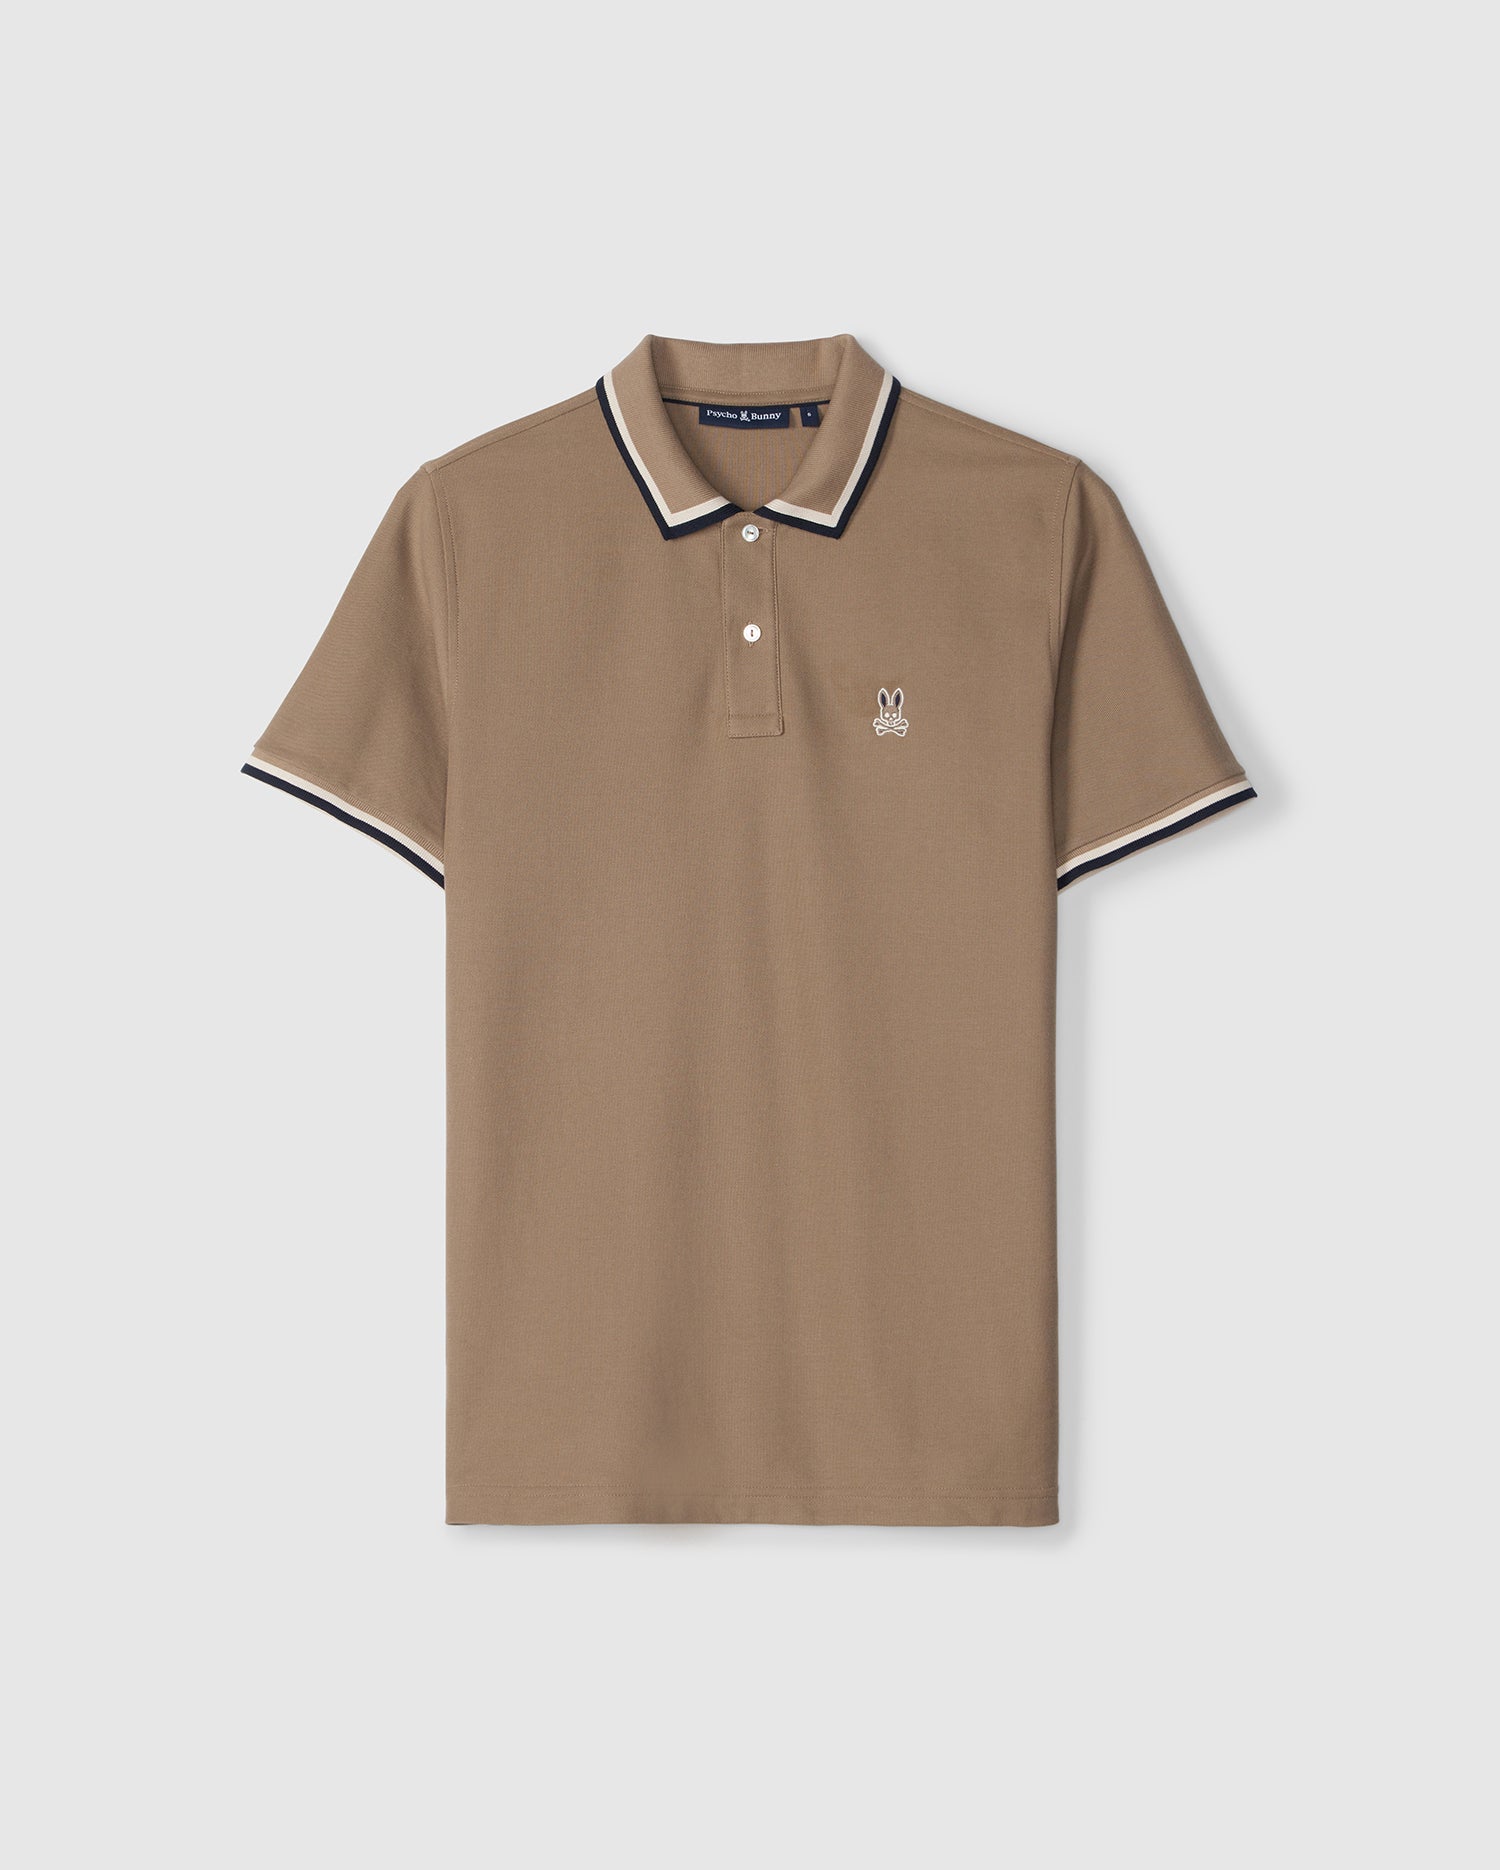 A taupe Psycho Bunny Kingsbury piqué polo shirt with contrasting stripes on the collar and sleeves, featuring a small embroidered logo on the left chest, displayed on a plain background.